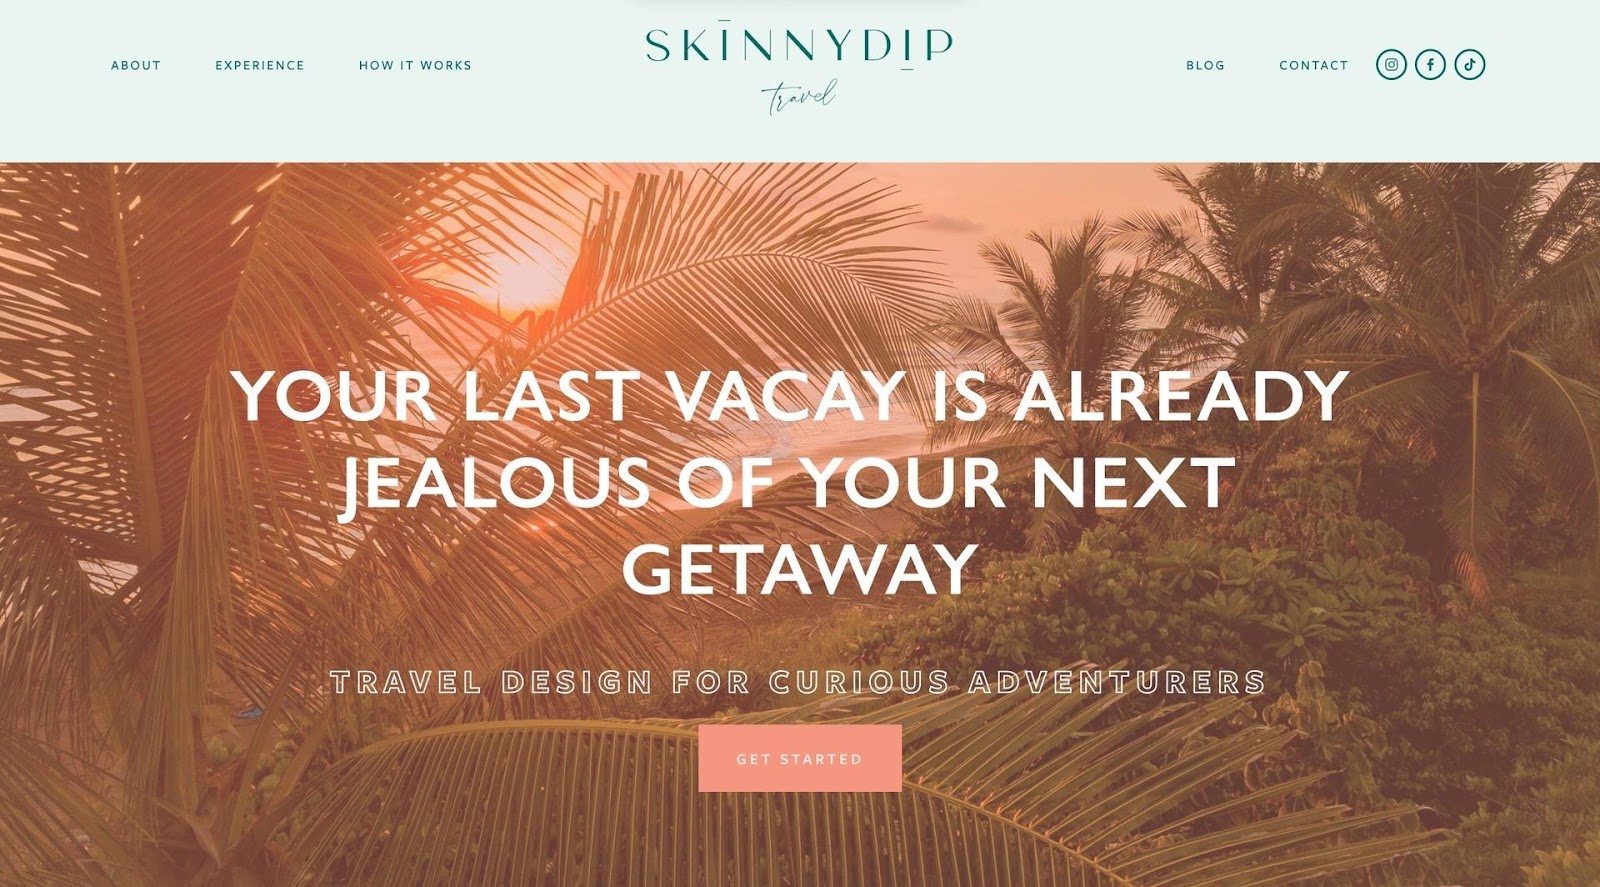 Skinny Dip Travel shares its brand purpose statement on its website.